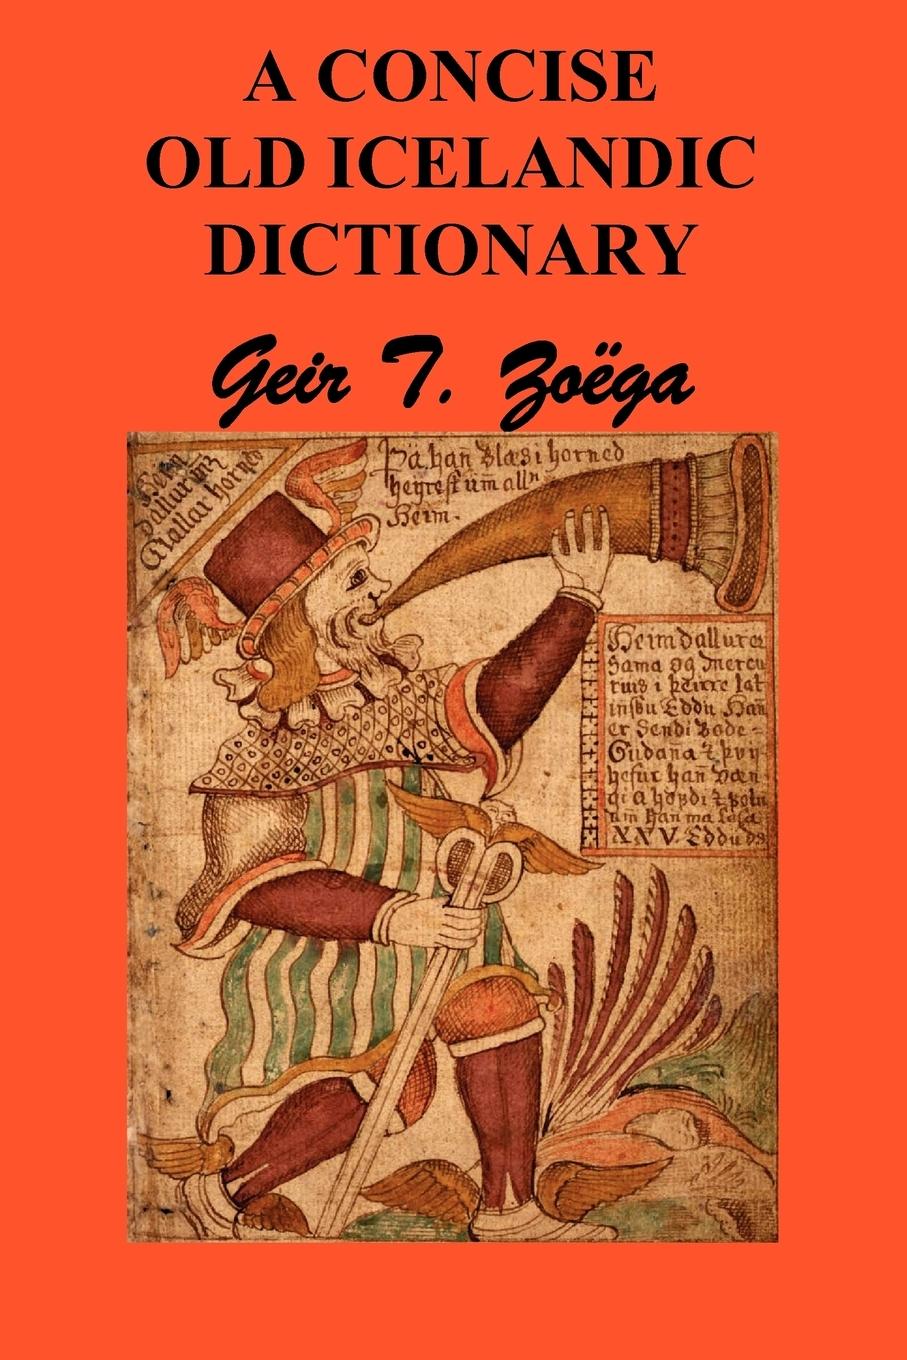 Zoga, G: Concise Dictionary of Old Icelandic - Zoga, Geir T.|Zoega, Geir T.